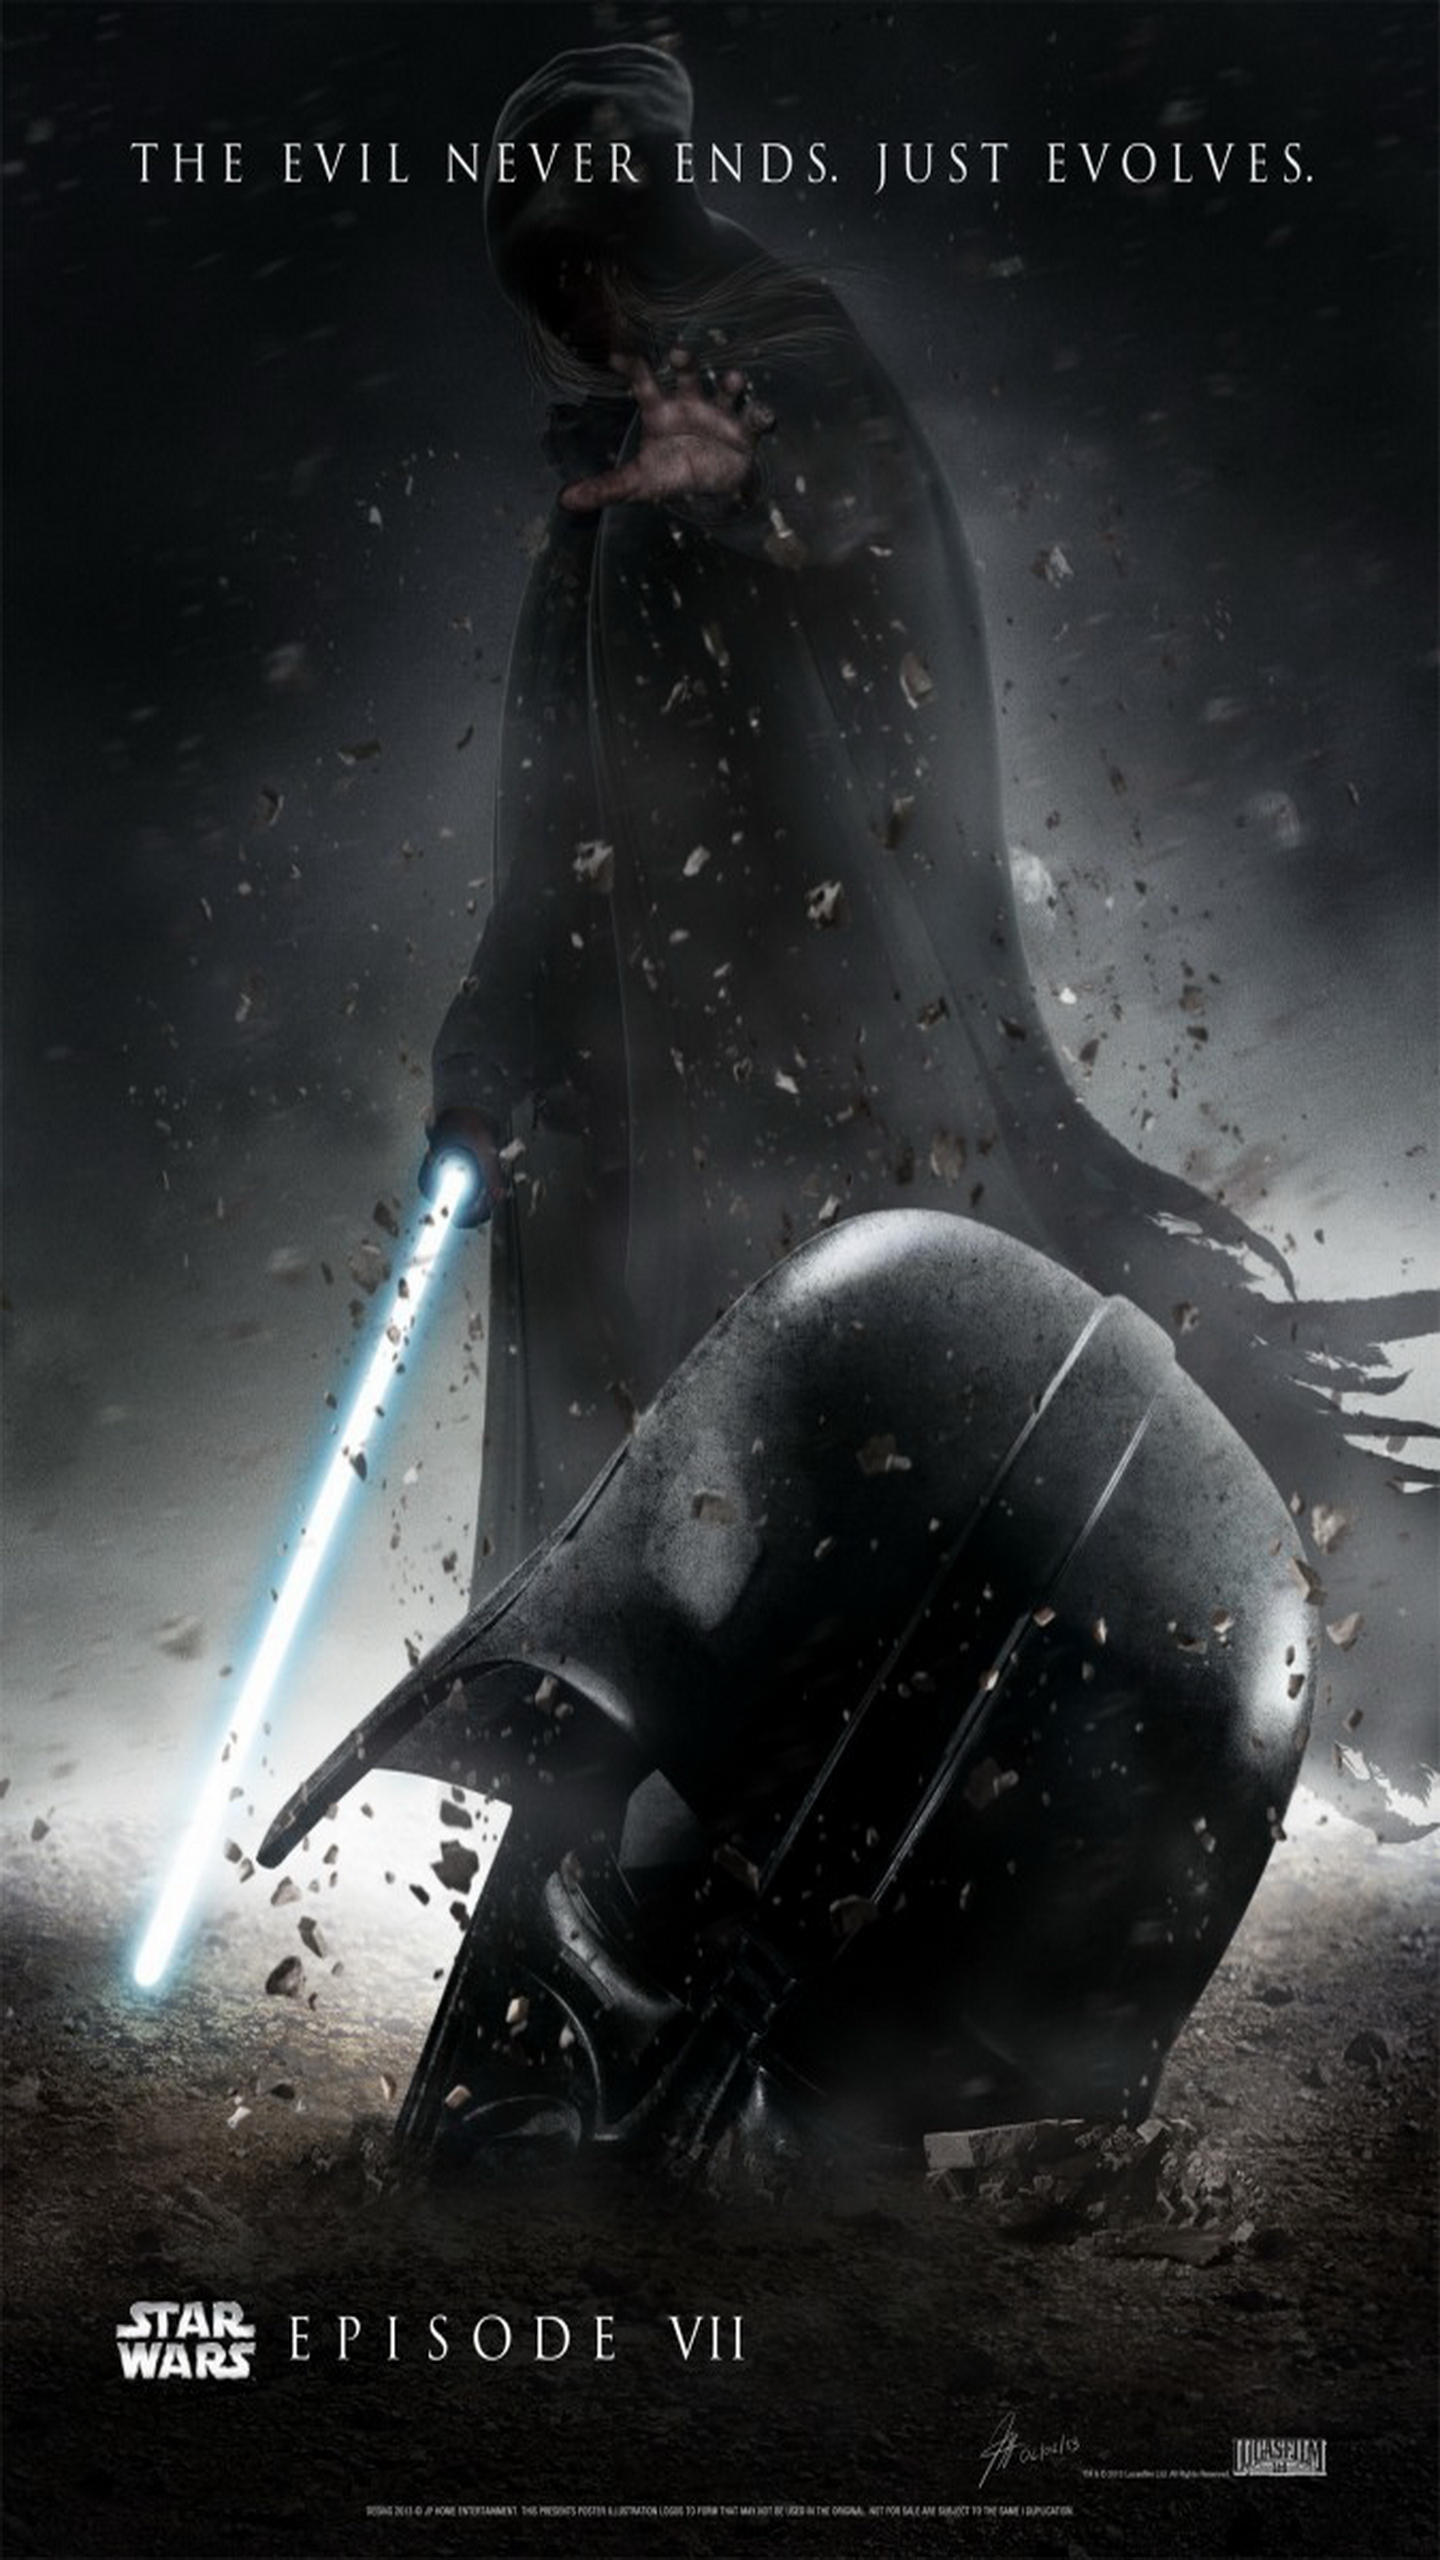 Star Wars Episode Vii The Force Awakens Poster Galaxy Note